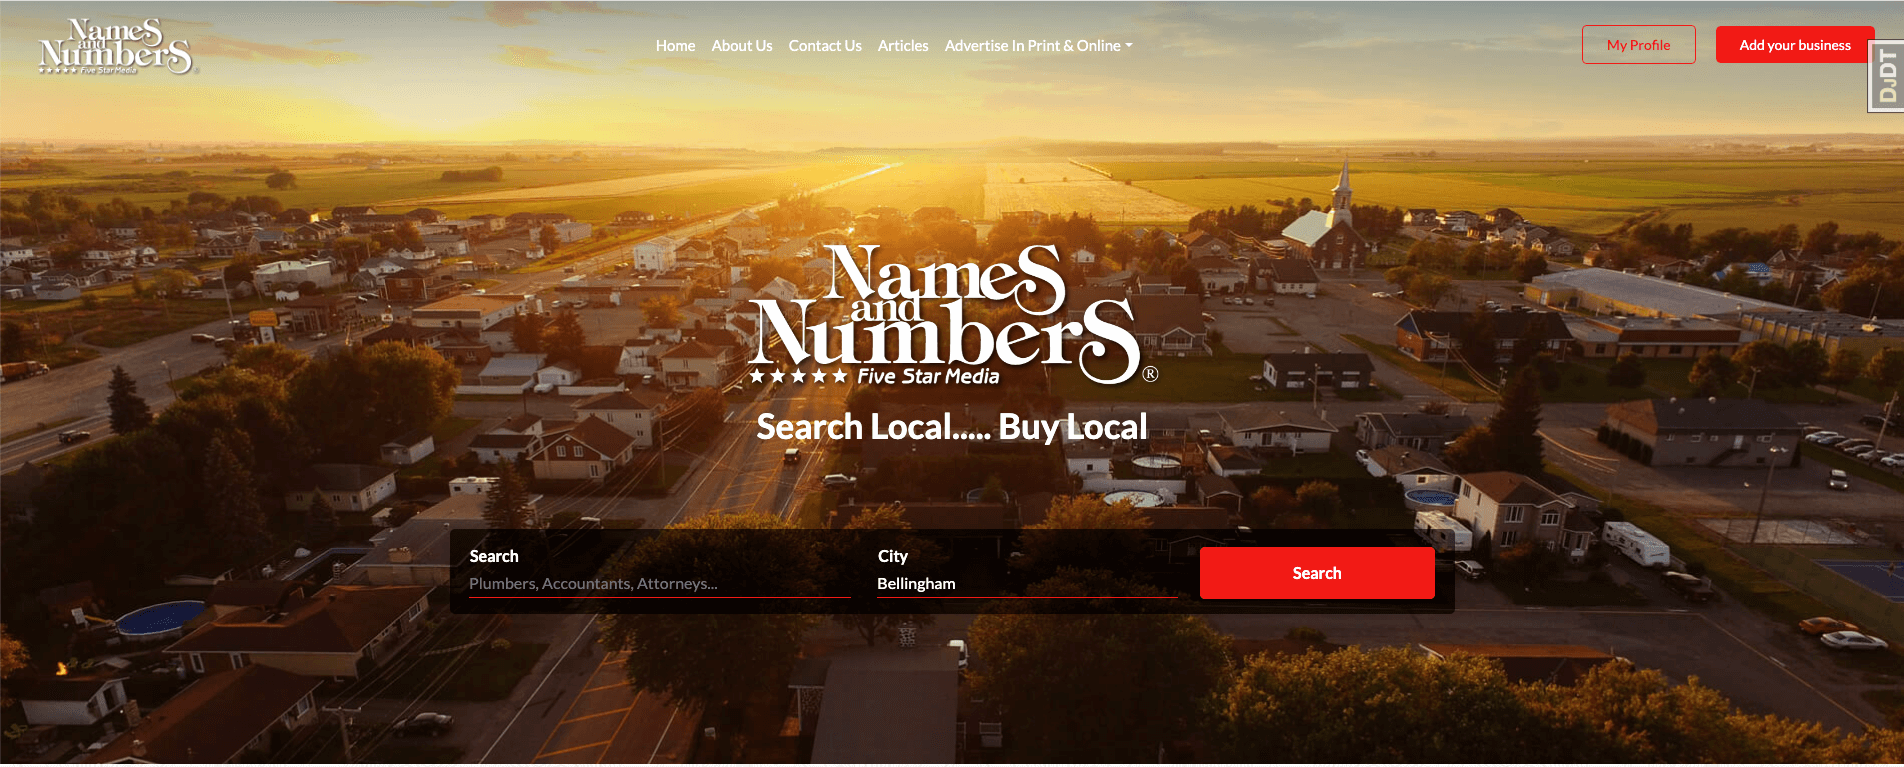 Names and Numbers home page